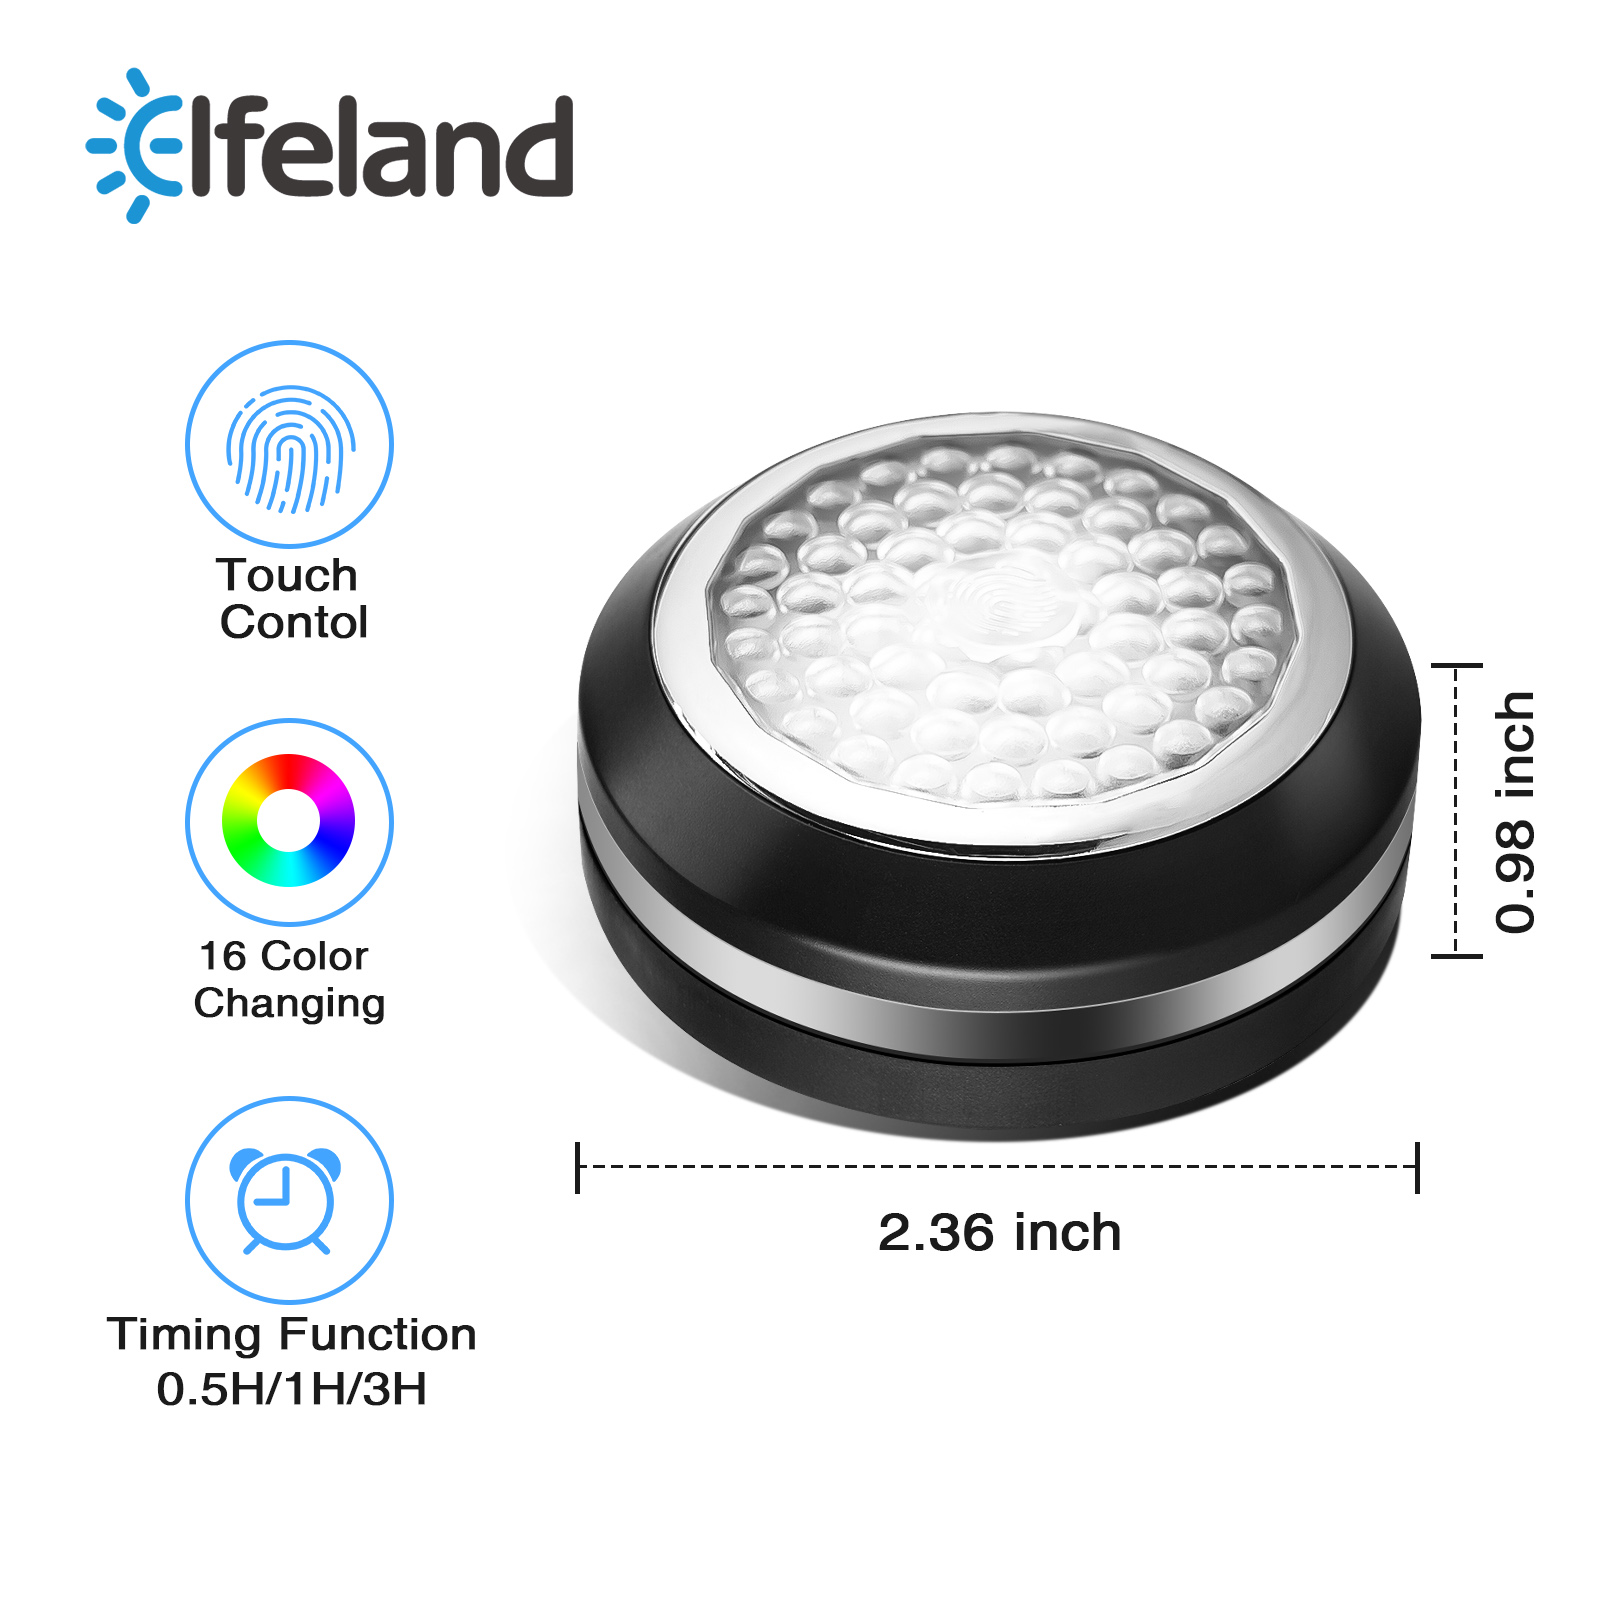 Elfeland-6PCS-DC-45V-RGB-3800-4000K-4-Modes-Touch-Round-Cabinet-Light-with-2PCS-Remote-Controller-fo-1884922-3